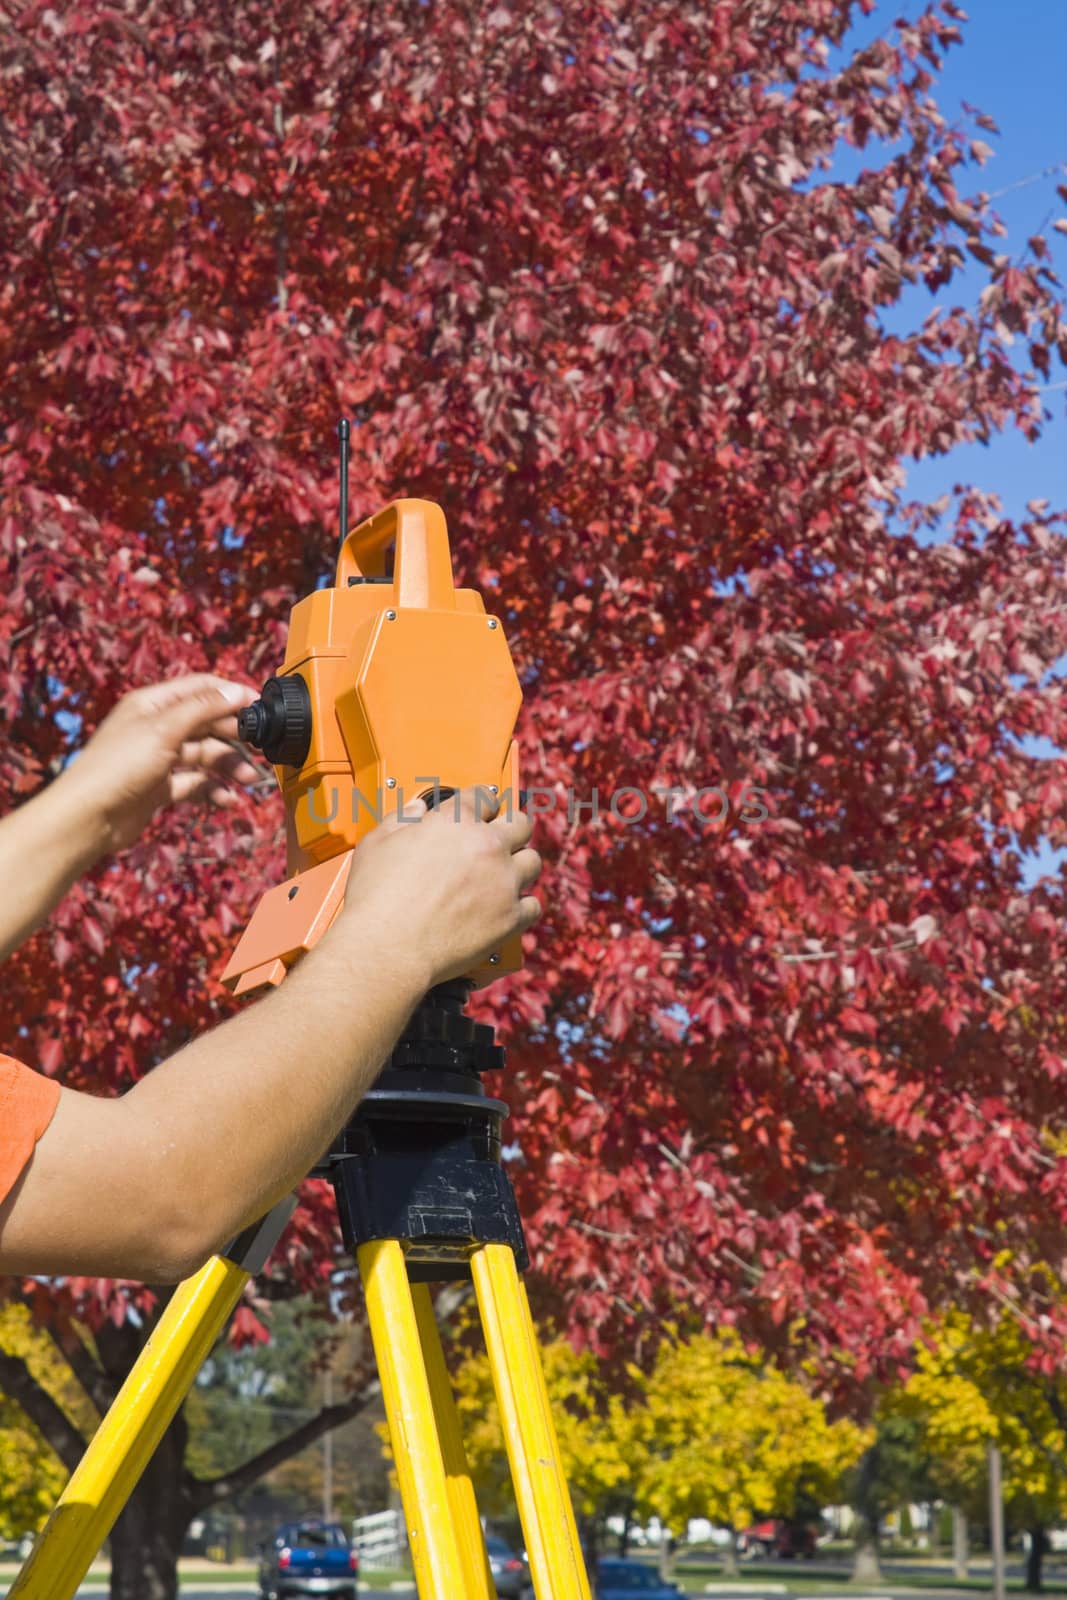 Hands on theodolite - land surveying during fall time.